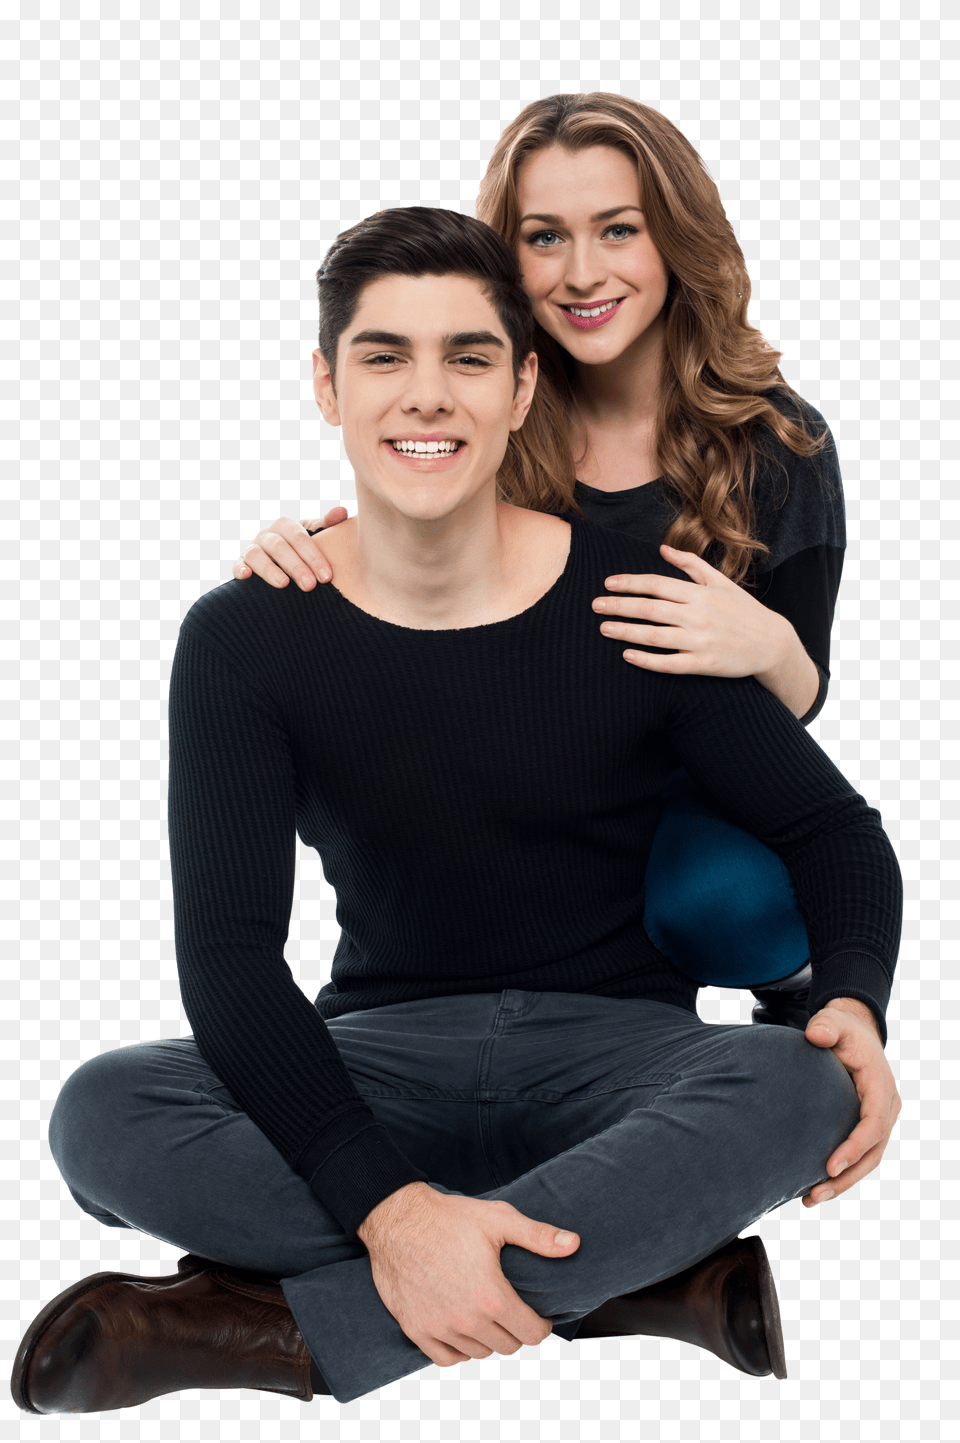 Couple Image With No, Gray Free Transparent Png